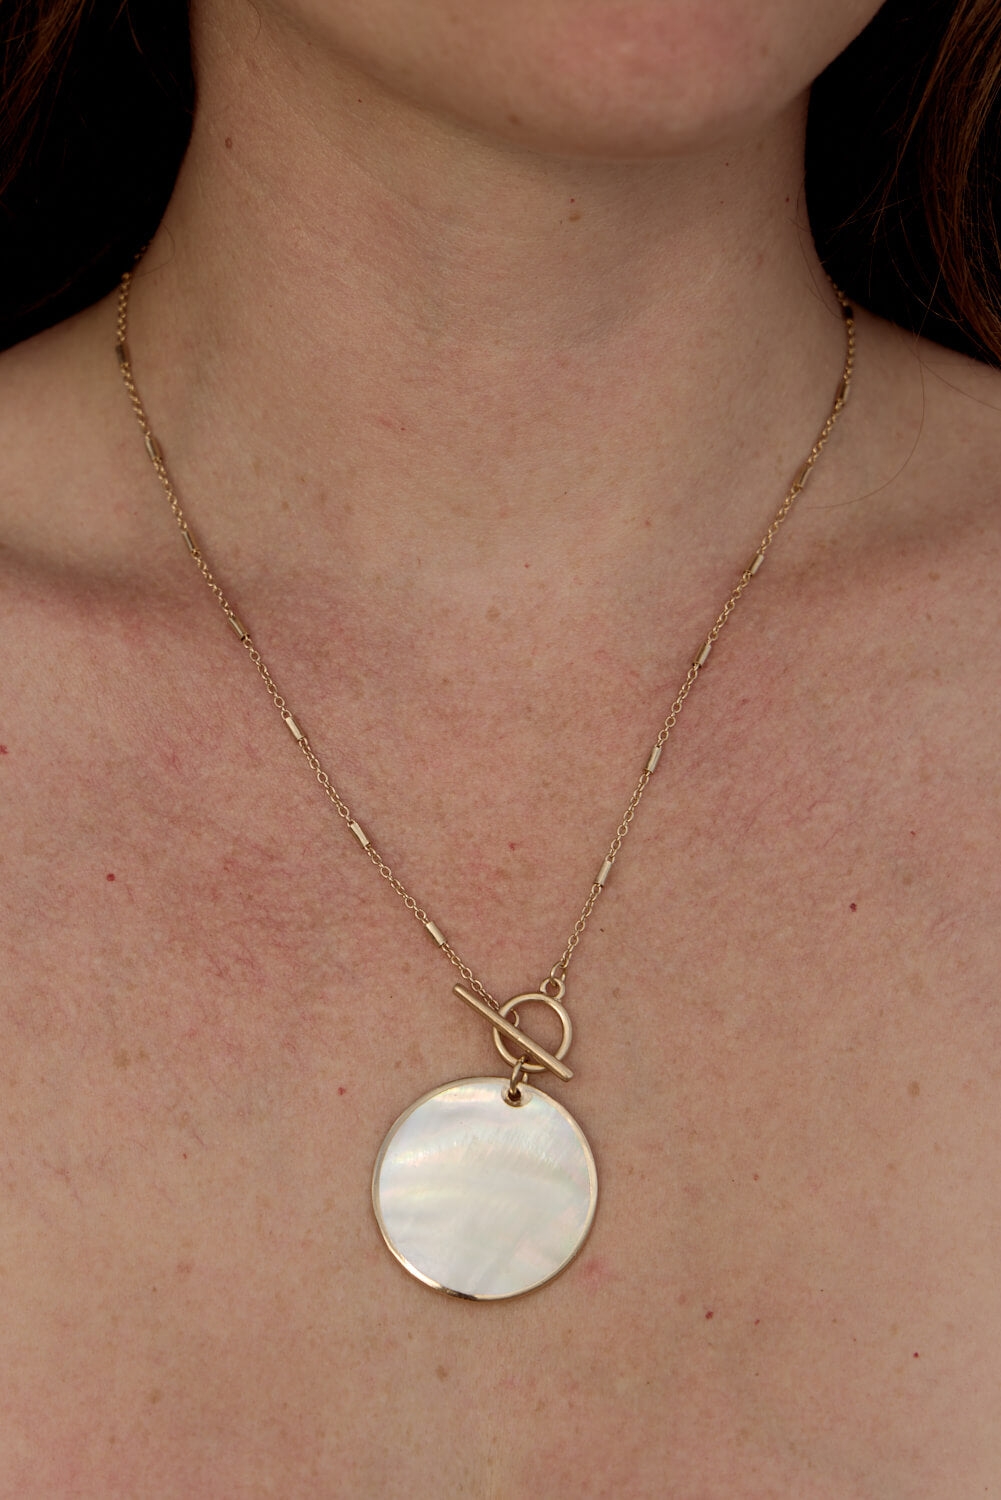 Womens gold necklace with opal inspired pendant